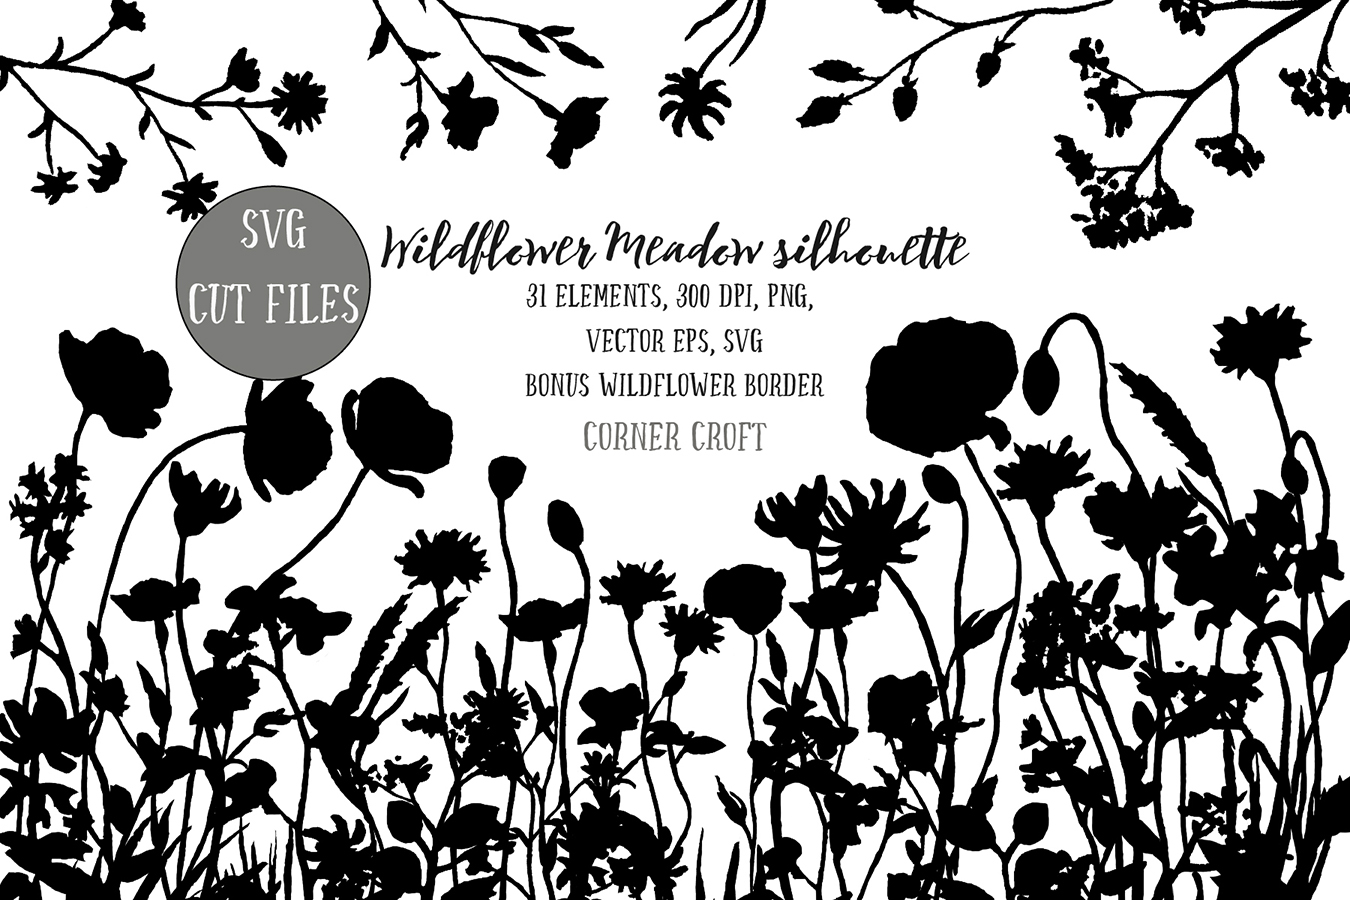 Wildflower meadow illustration silhouette, PNG, SVG and EPS